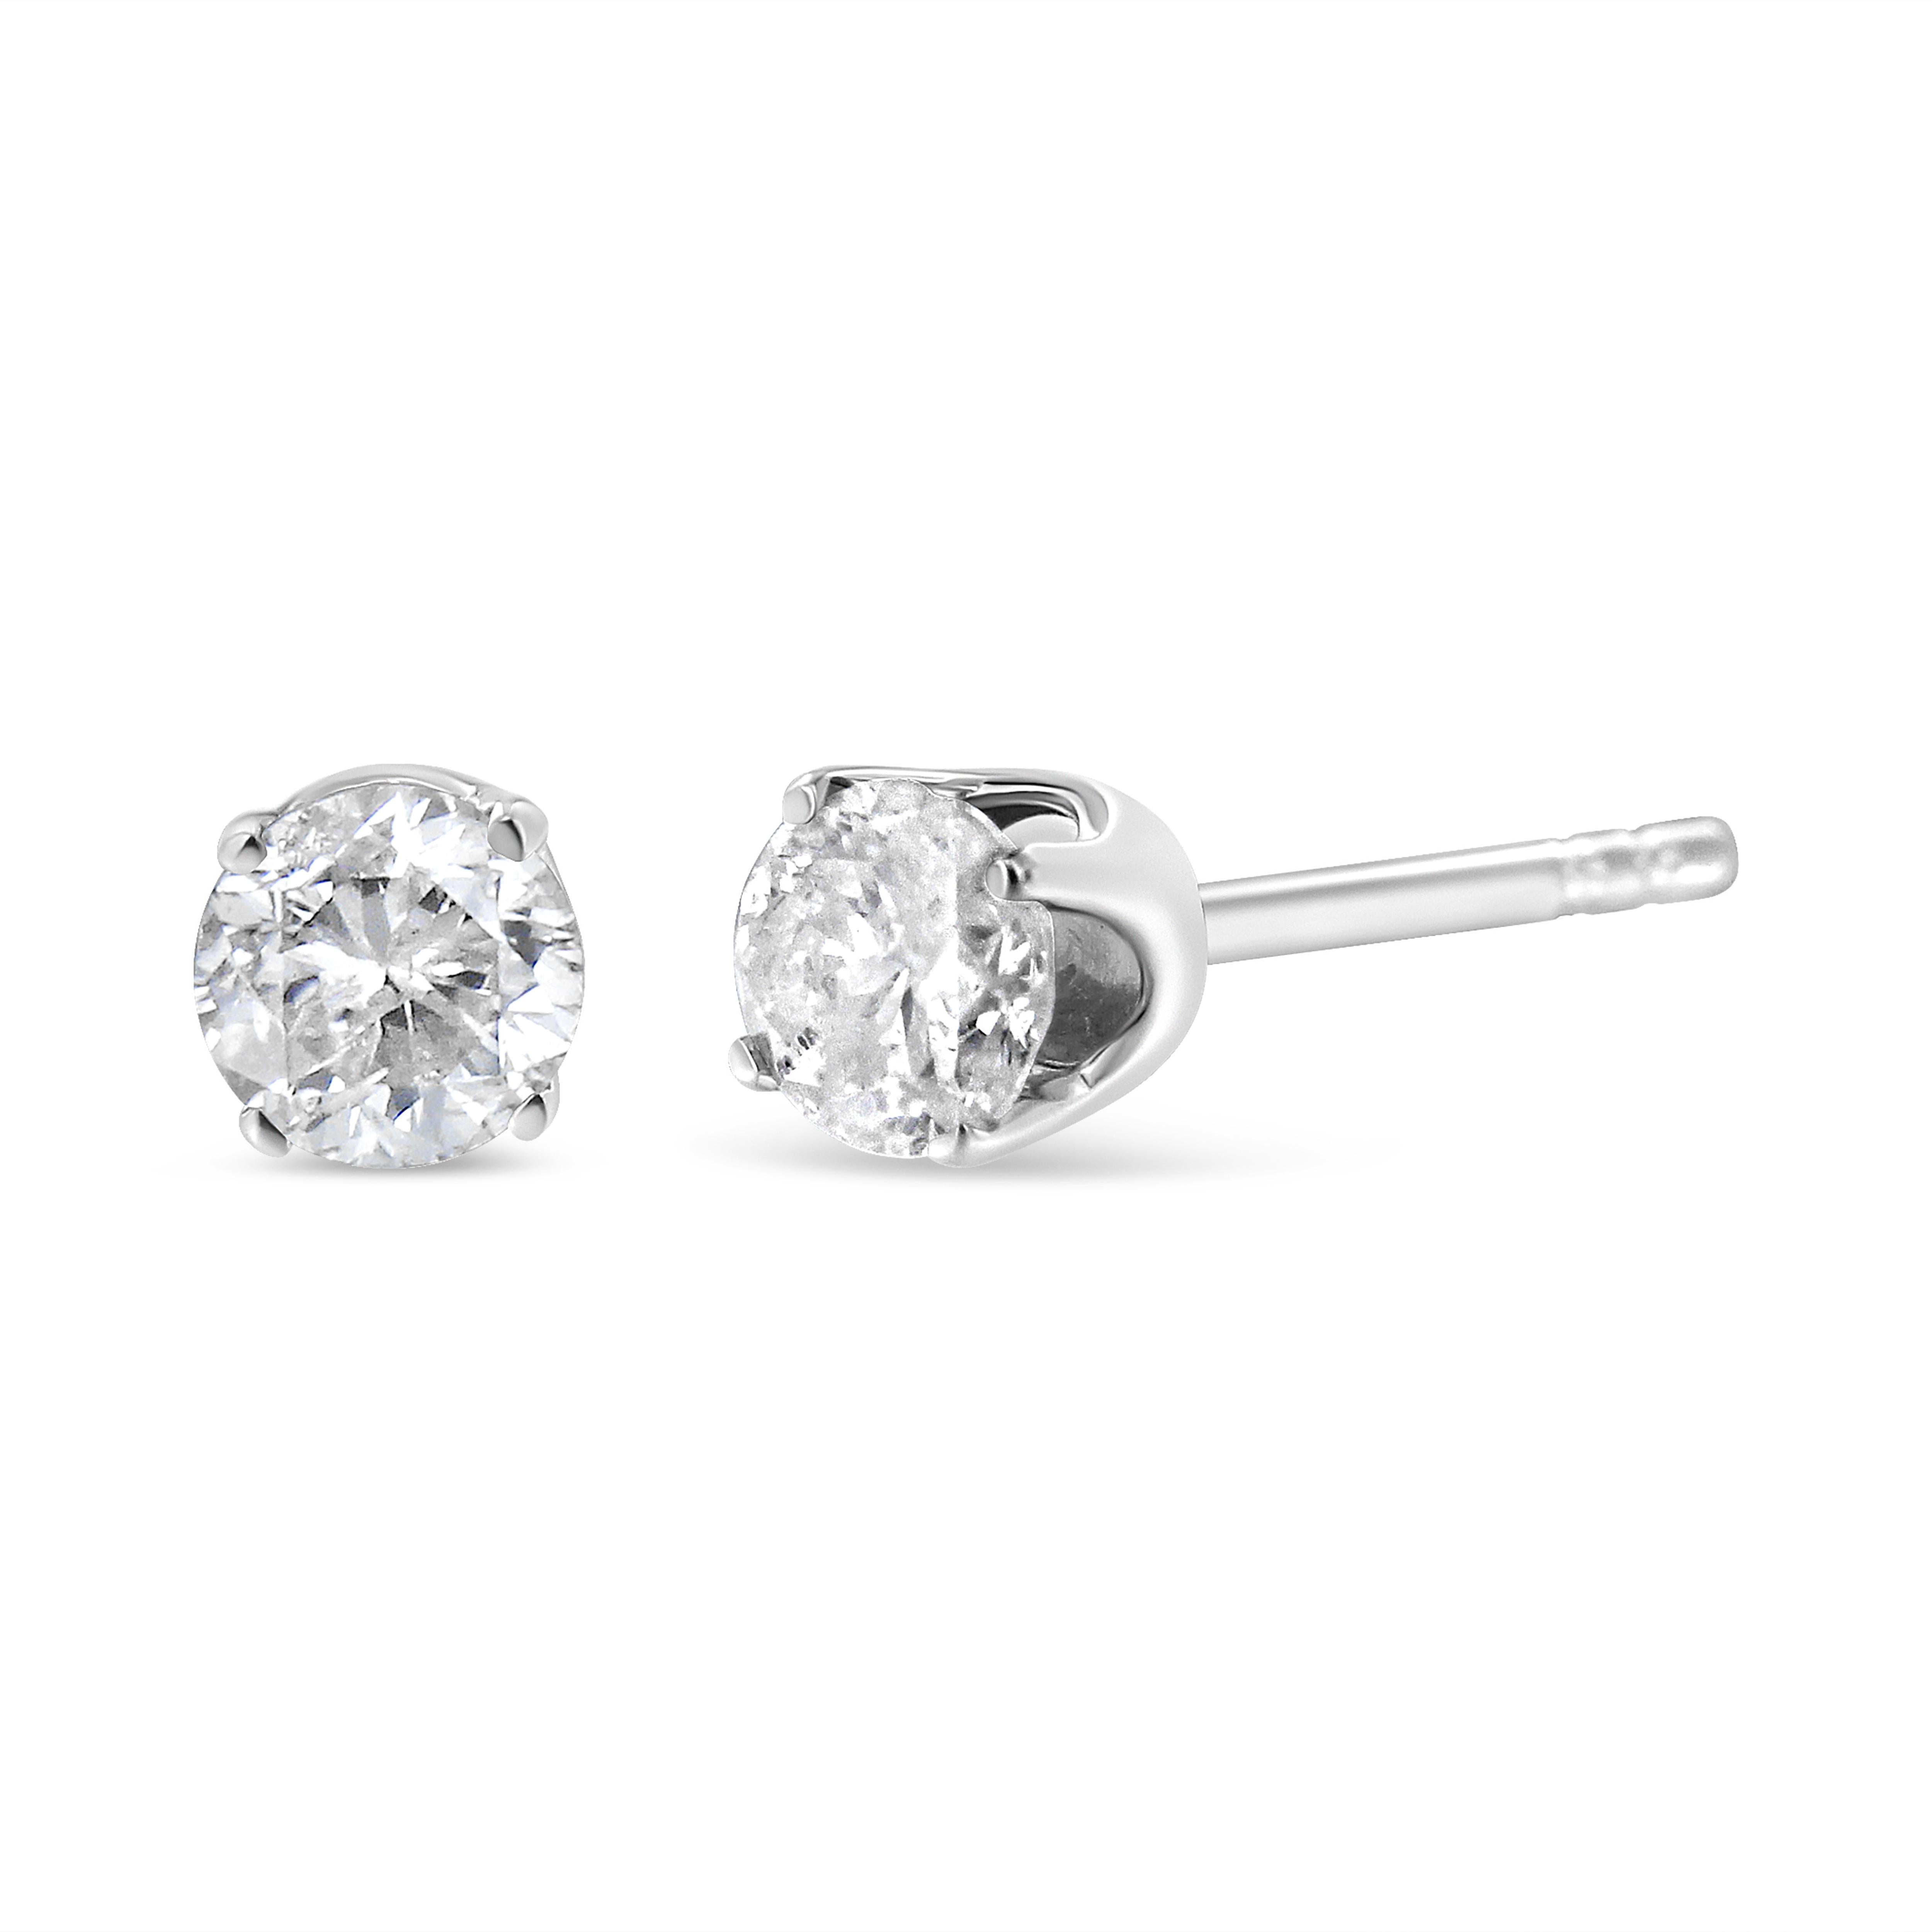 Frame her face with the bold and impressive look of these stunning diamond stud earrings. Crafted in 14K white gold, each earring features a mesmerizing 0.25 ct. diamond solitaire in a four-prong setting. Captivating with 0.50 ct tdw of diamonds and